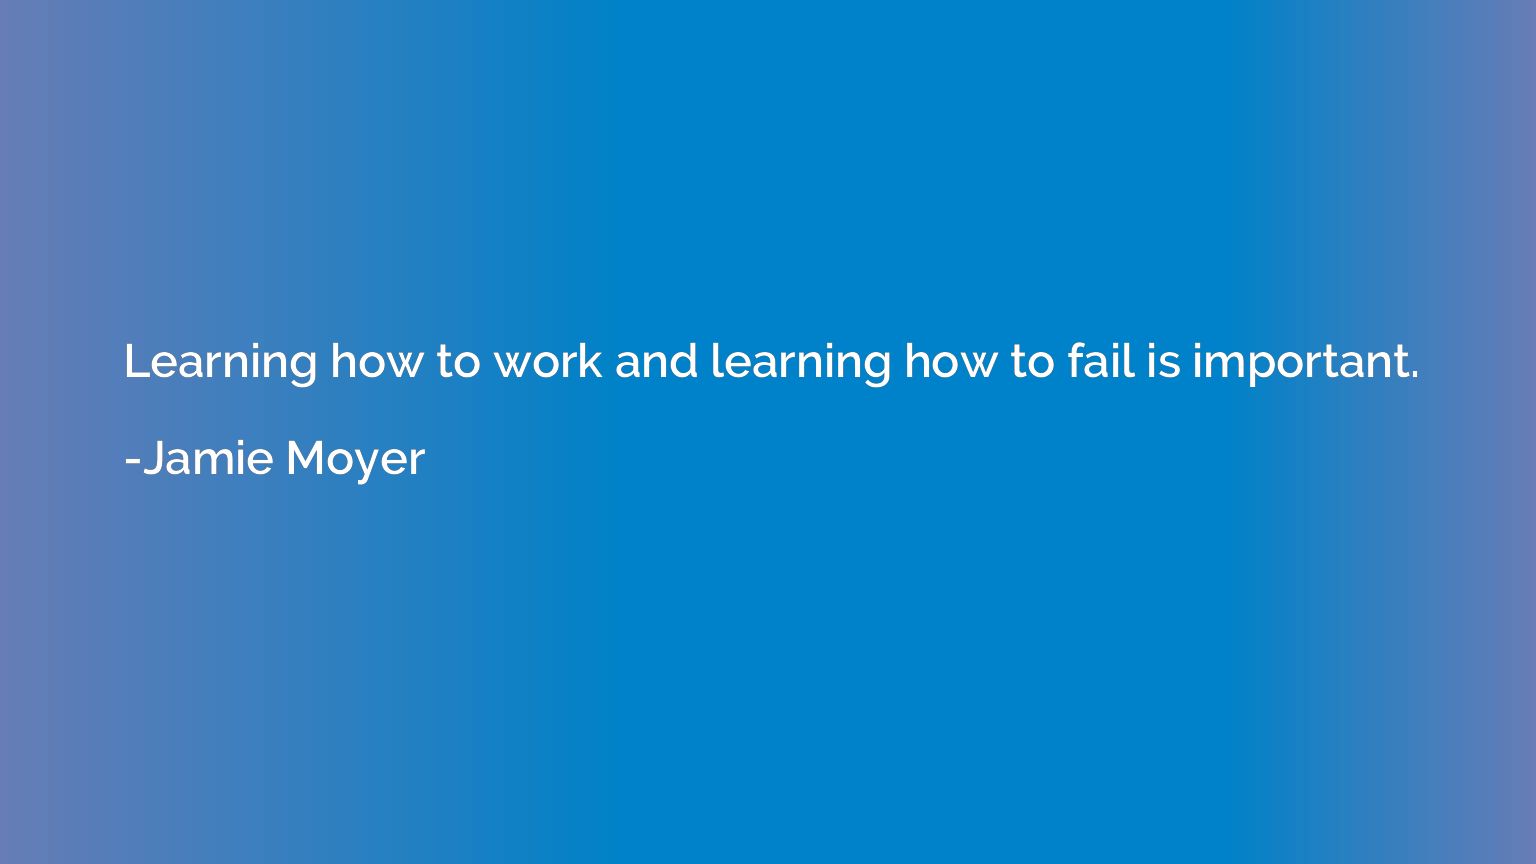 Learning how to work and learning how to fail is important.